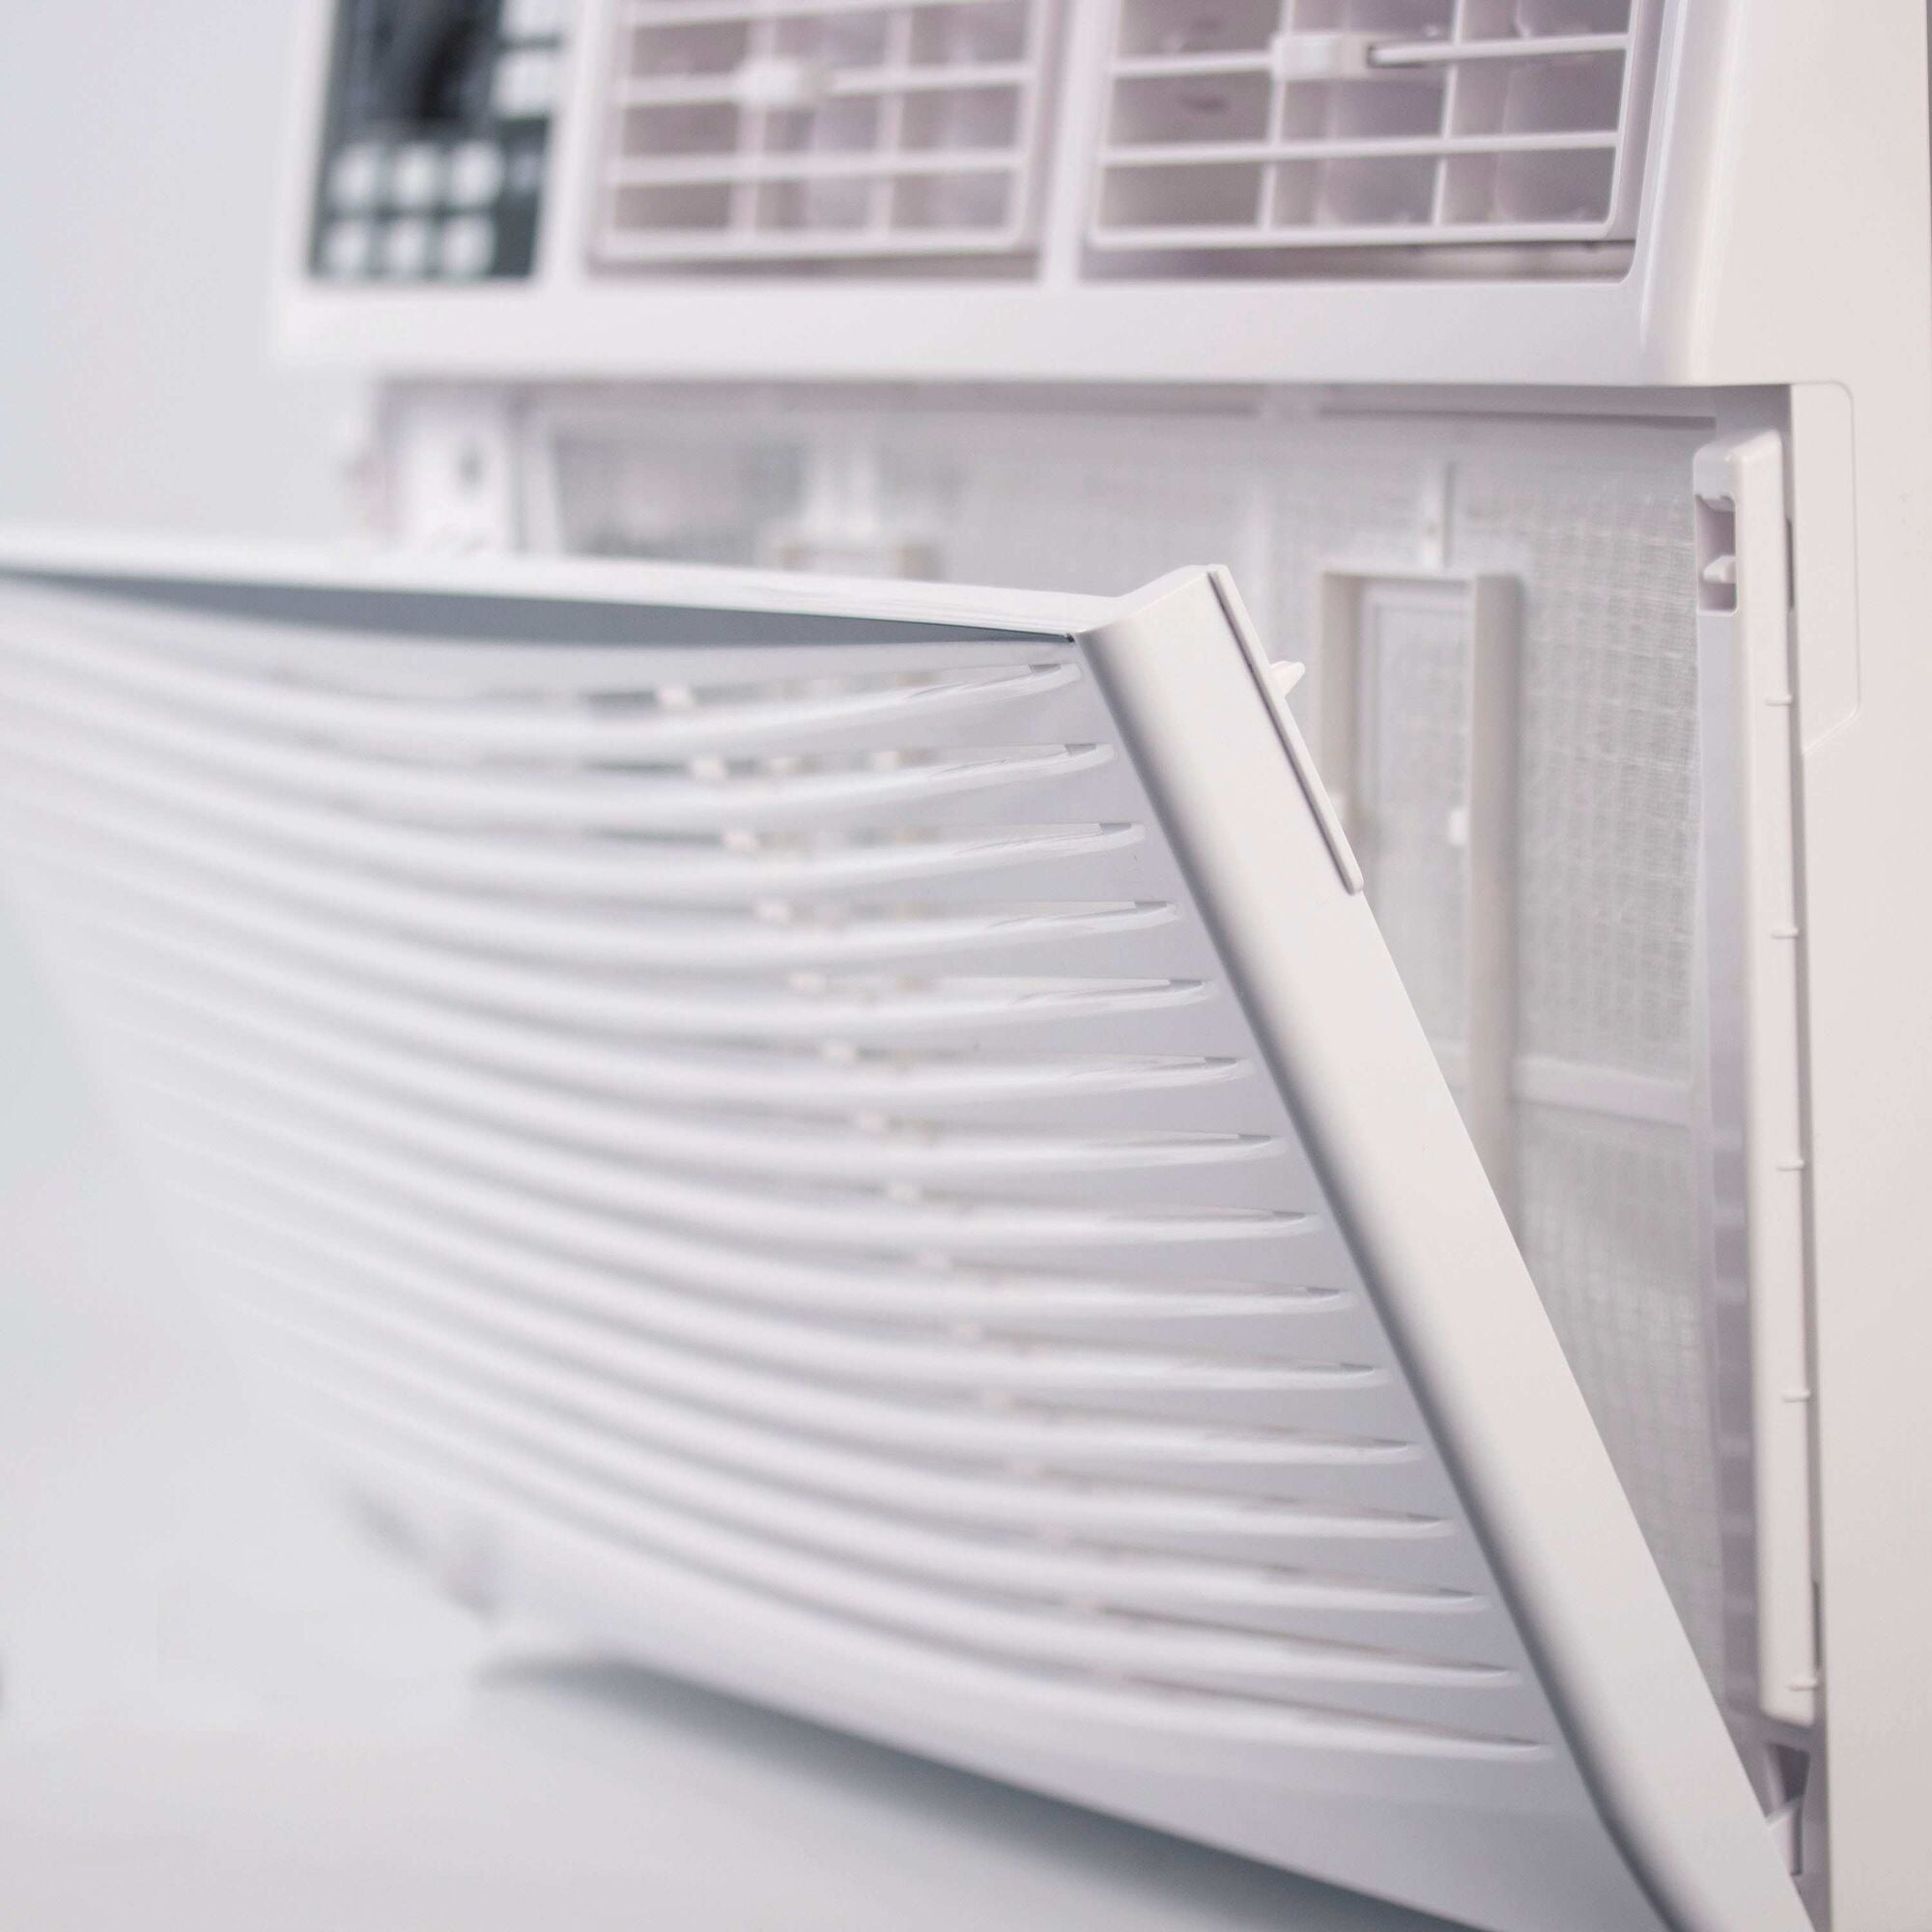 Black+Decker BWAC10WT Air Conditioner Review - Consumer Reports